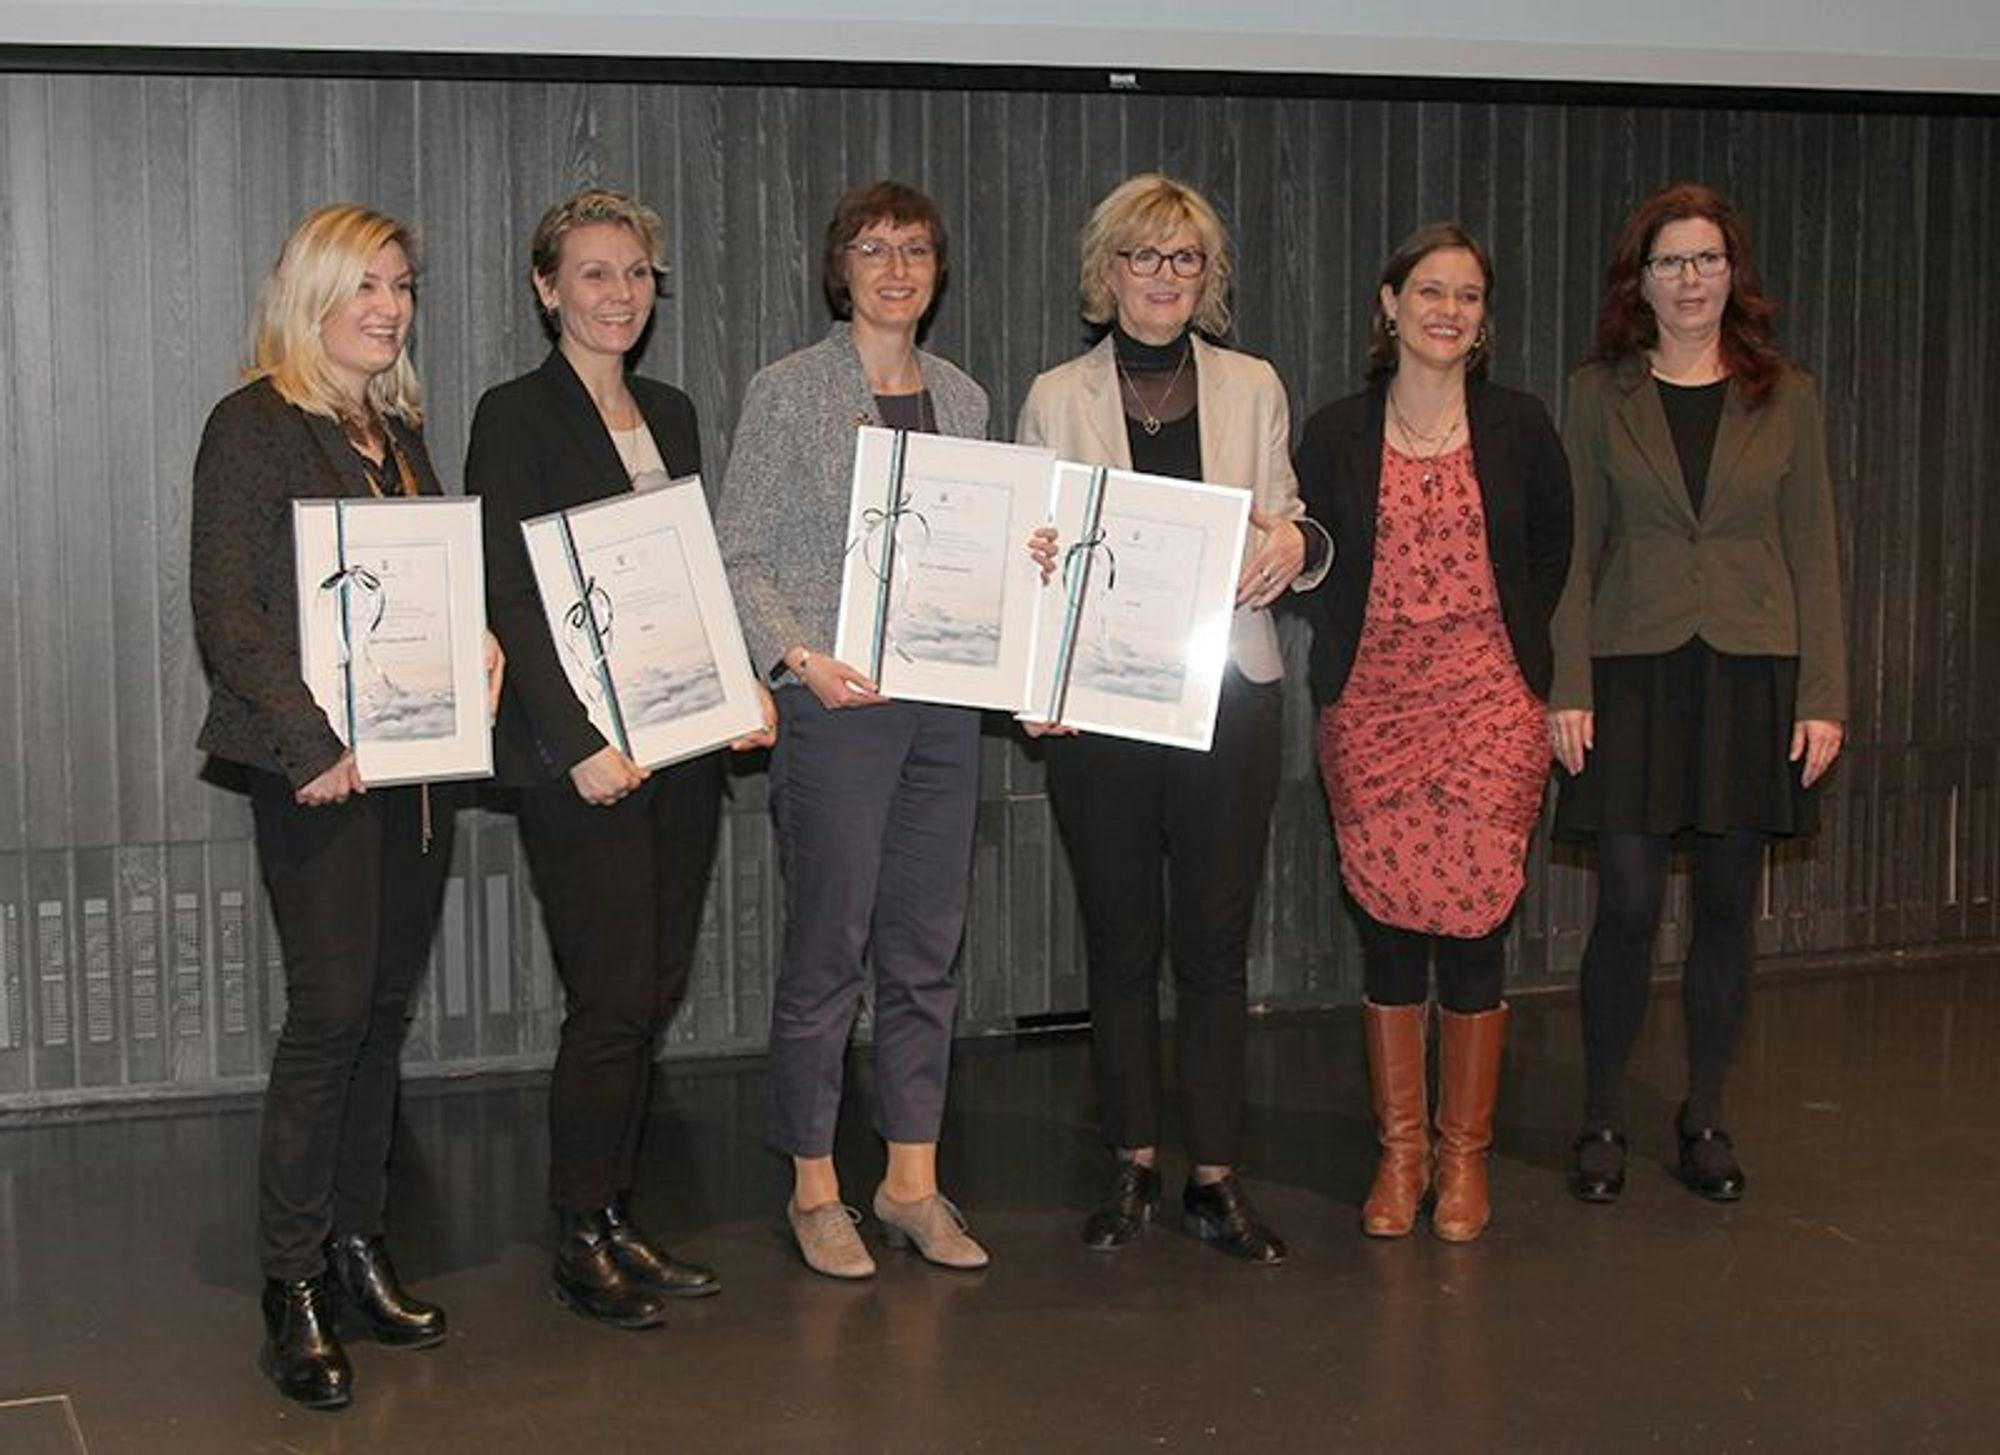 Six women standing together and holding certificates 